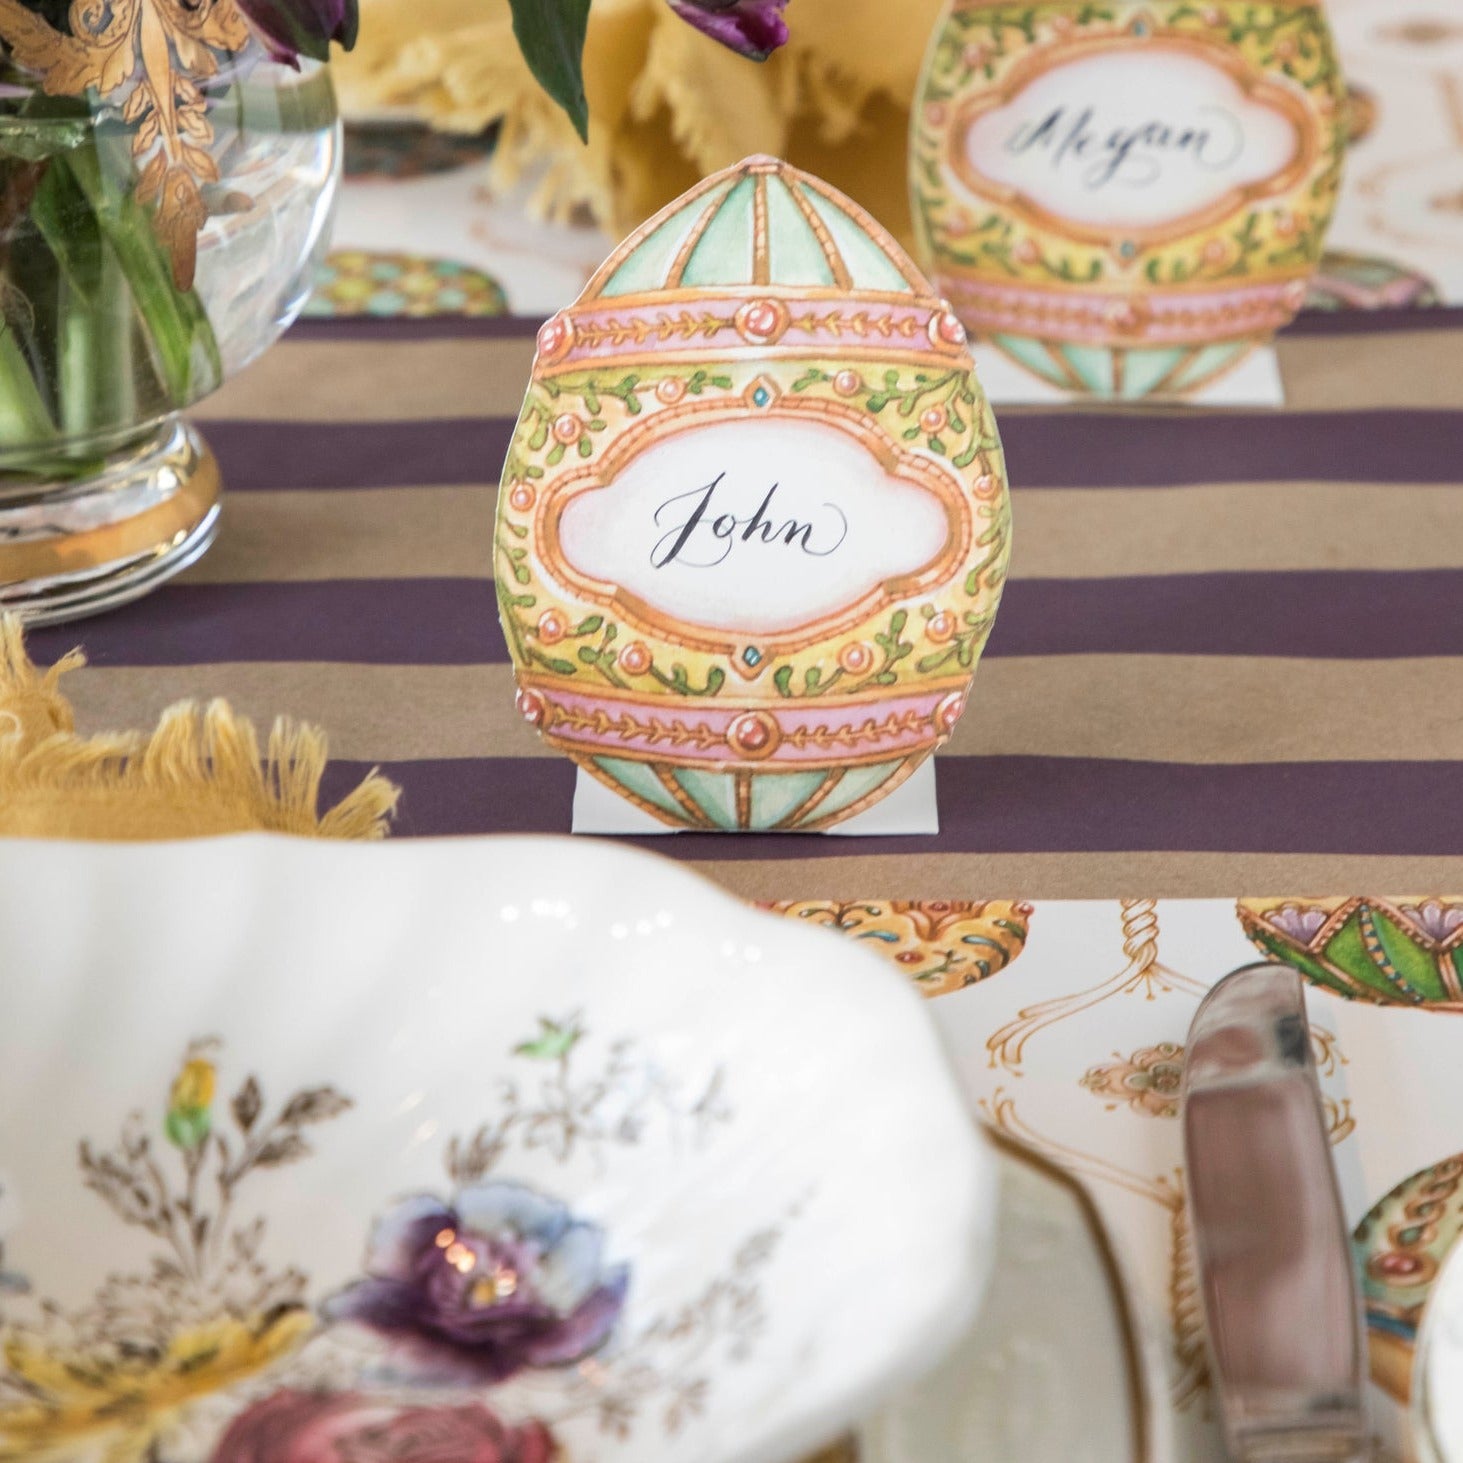 Easter table setting with Exquisite Egg Place Cards by Hester &amp; Cook for labeling dishes.